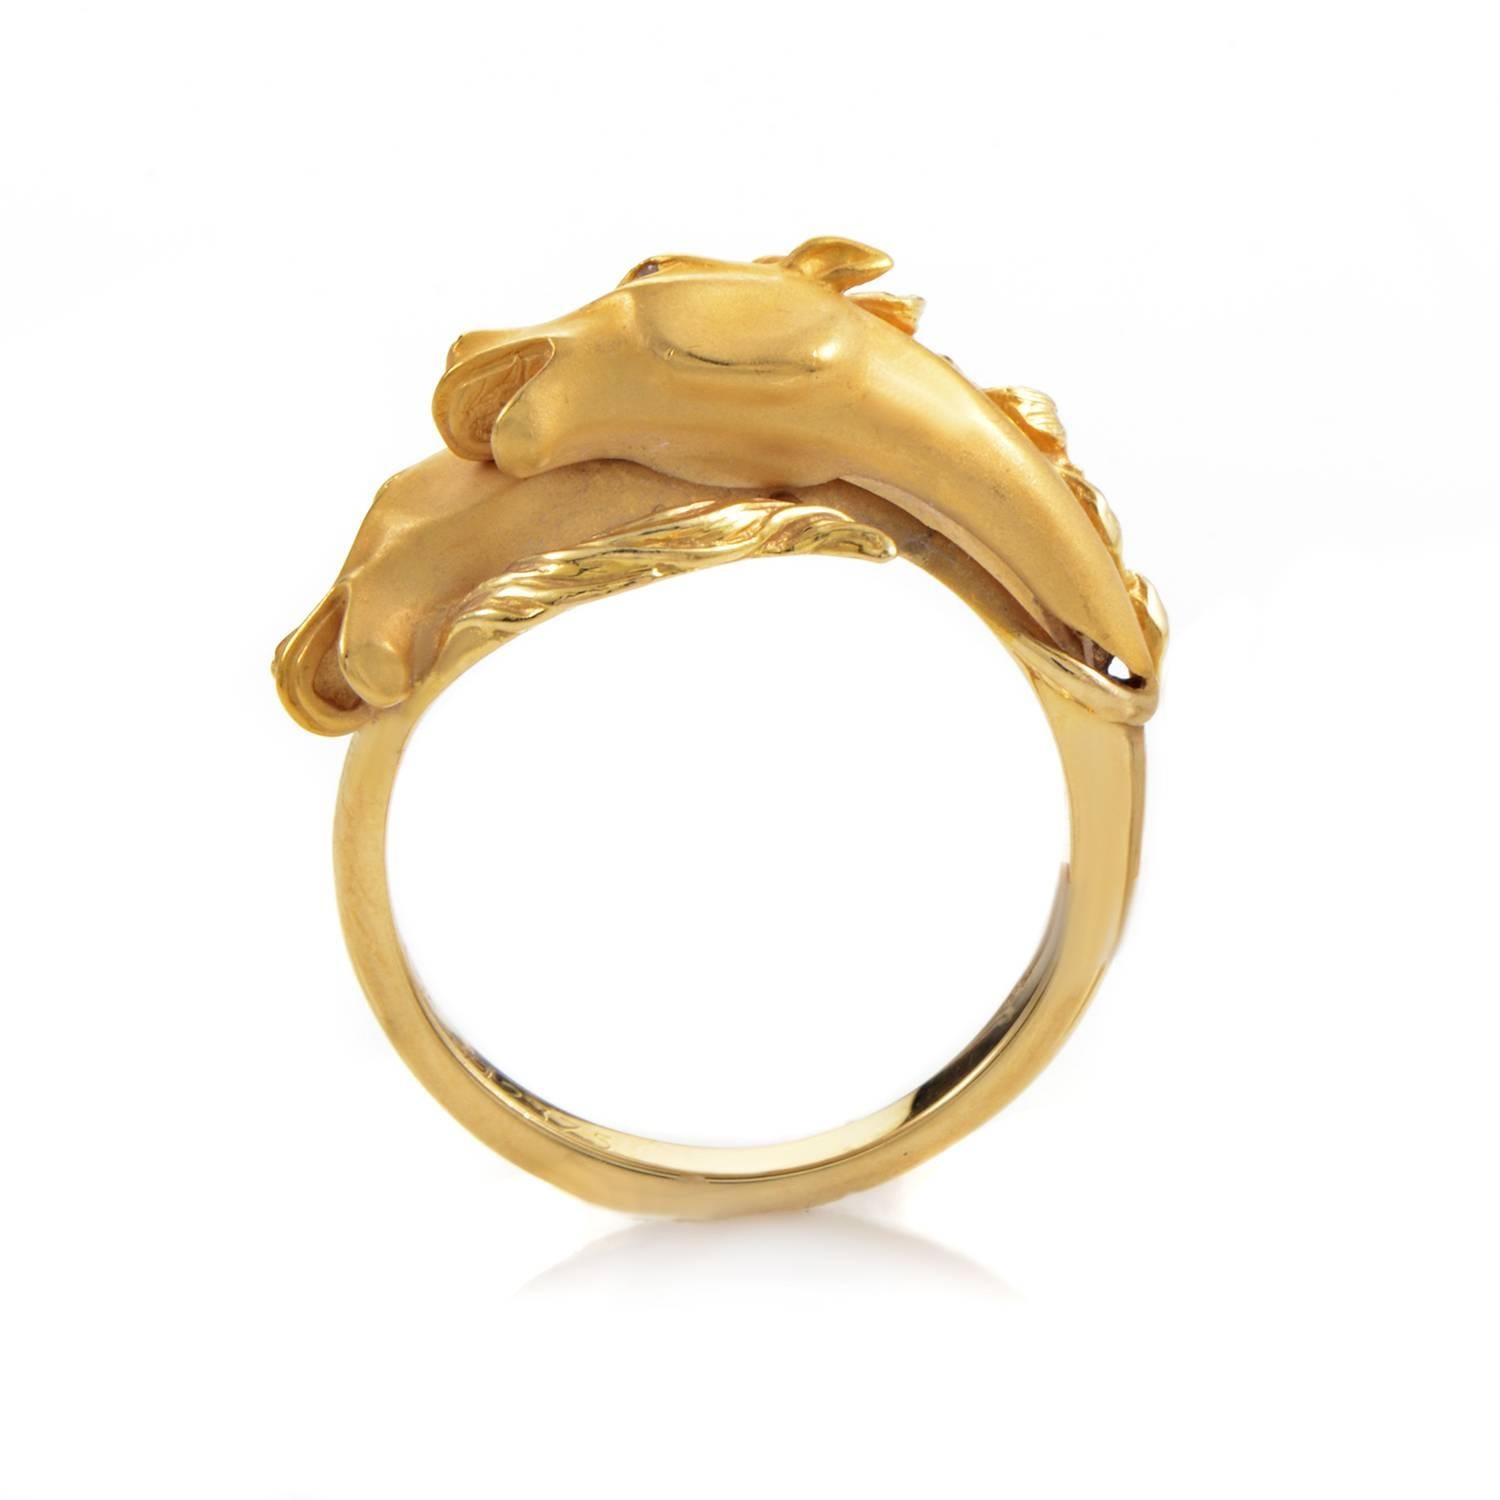 Horses take on luxurious velocity in this compelling ring design from Carrera y Carrera. Two equine busts vie for the lead in this ring's ascent of 18K Yellow Gold. The precious metal flows with fine detail as their manes ripple in the wind, while